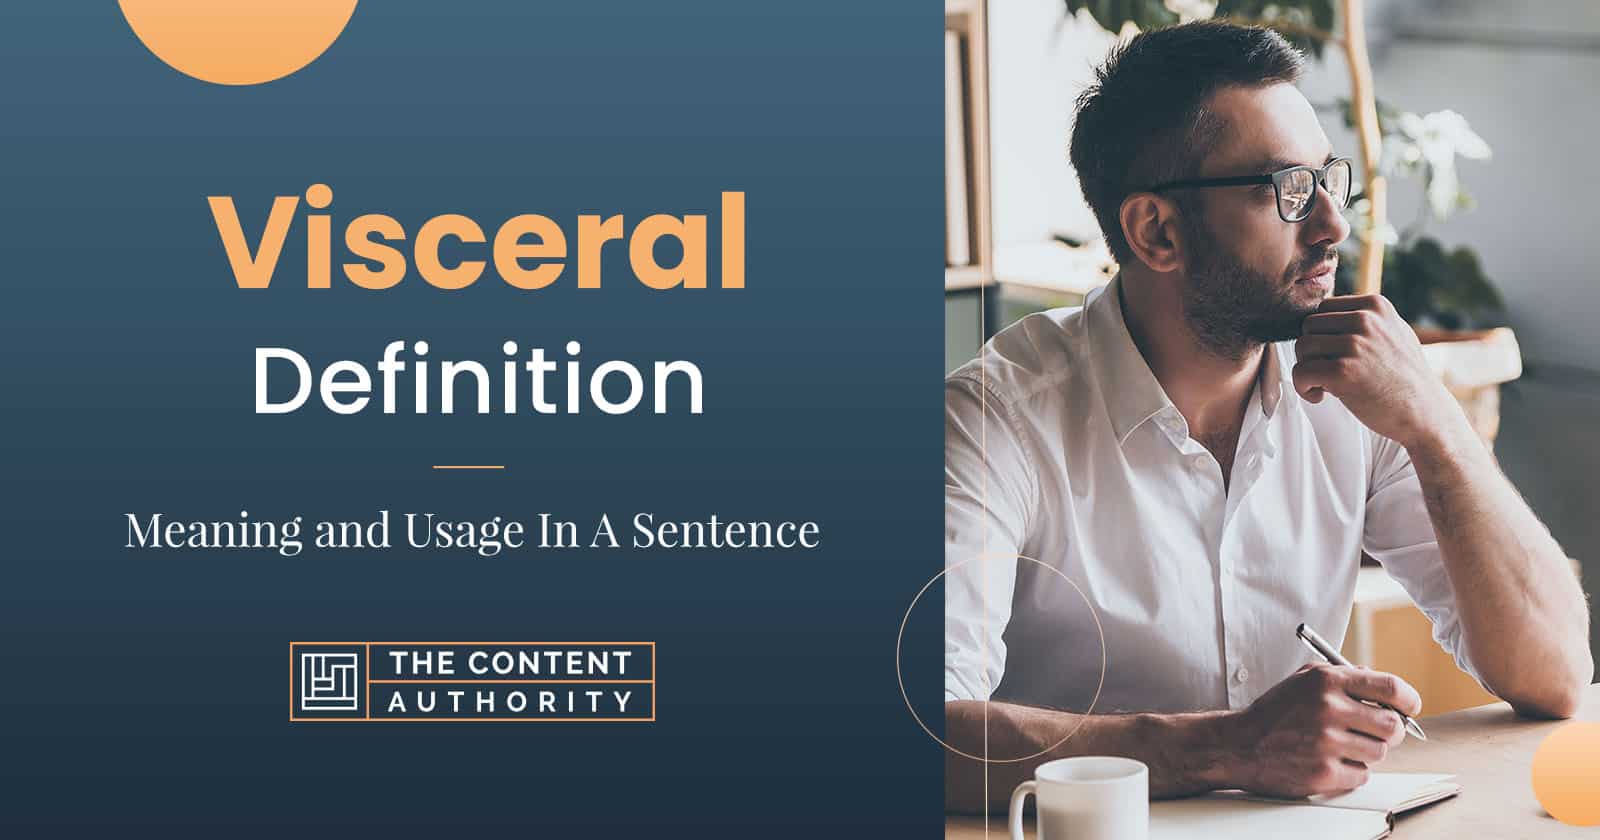 Visceral Definition – Meaning and Usage in a Sentence